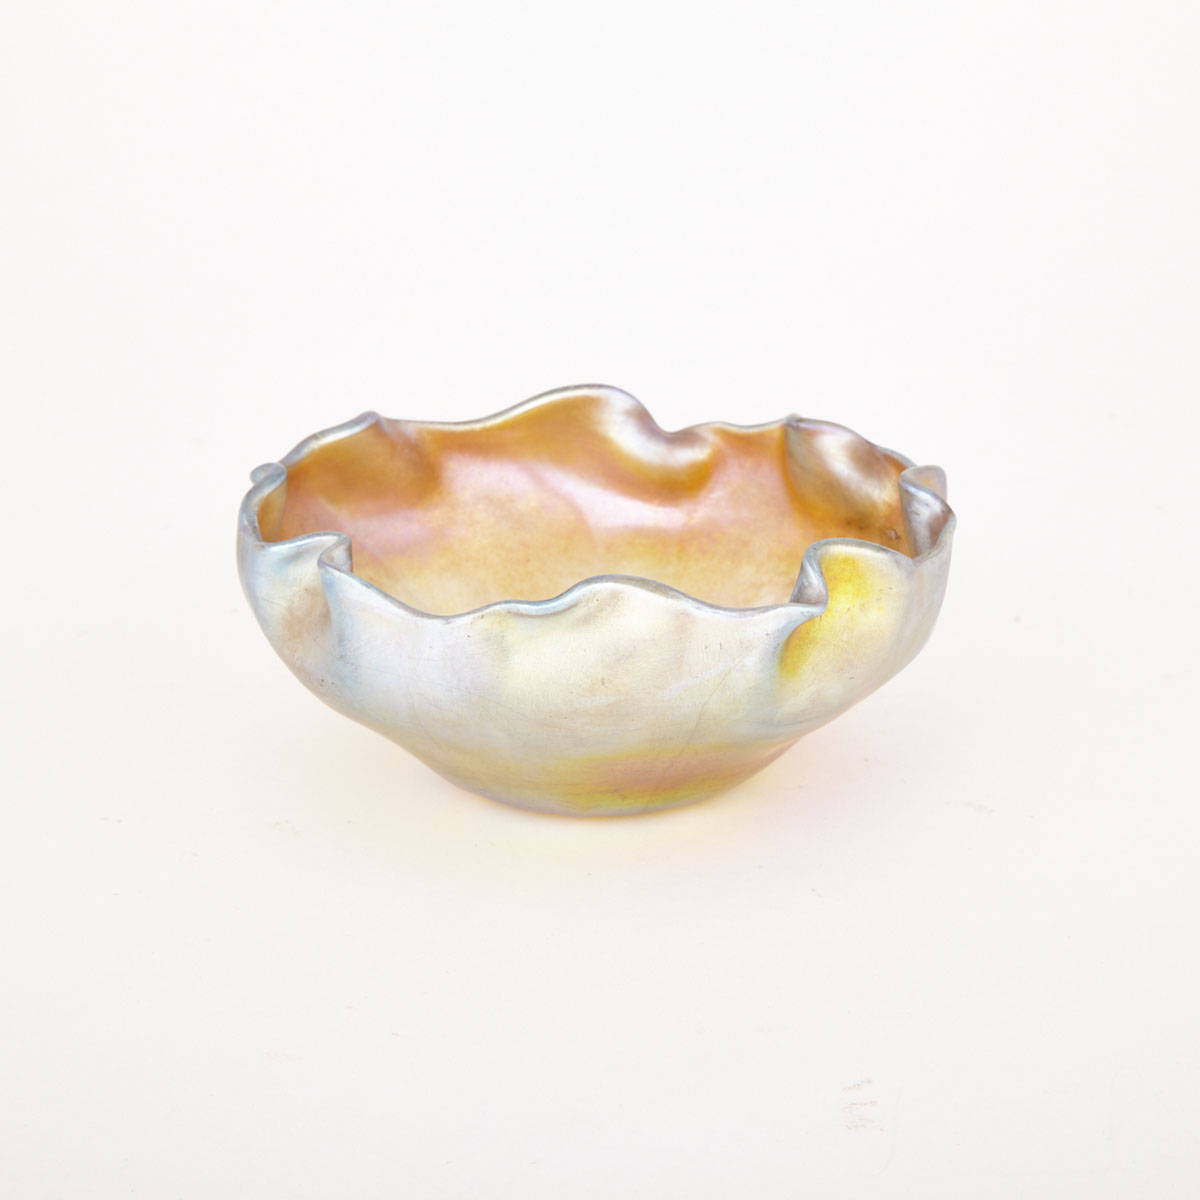 Tiffany ‘Favrile’ Iridescent Glass Bowl, early 20th century